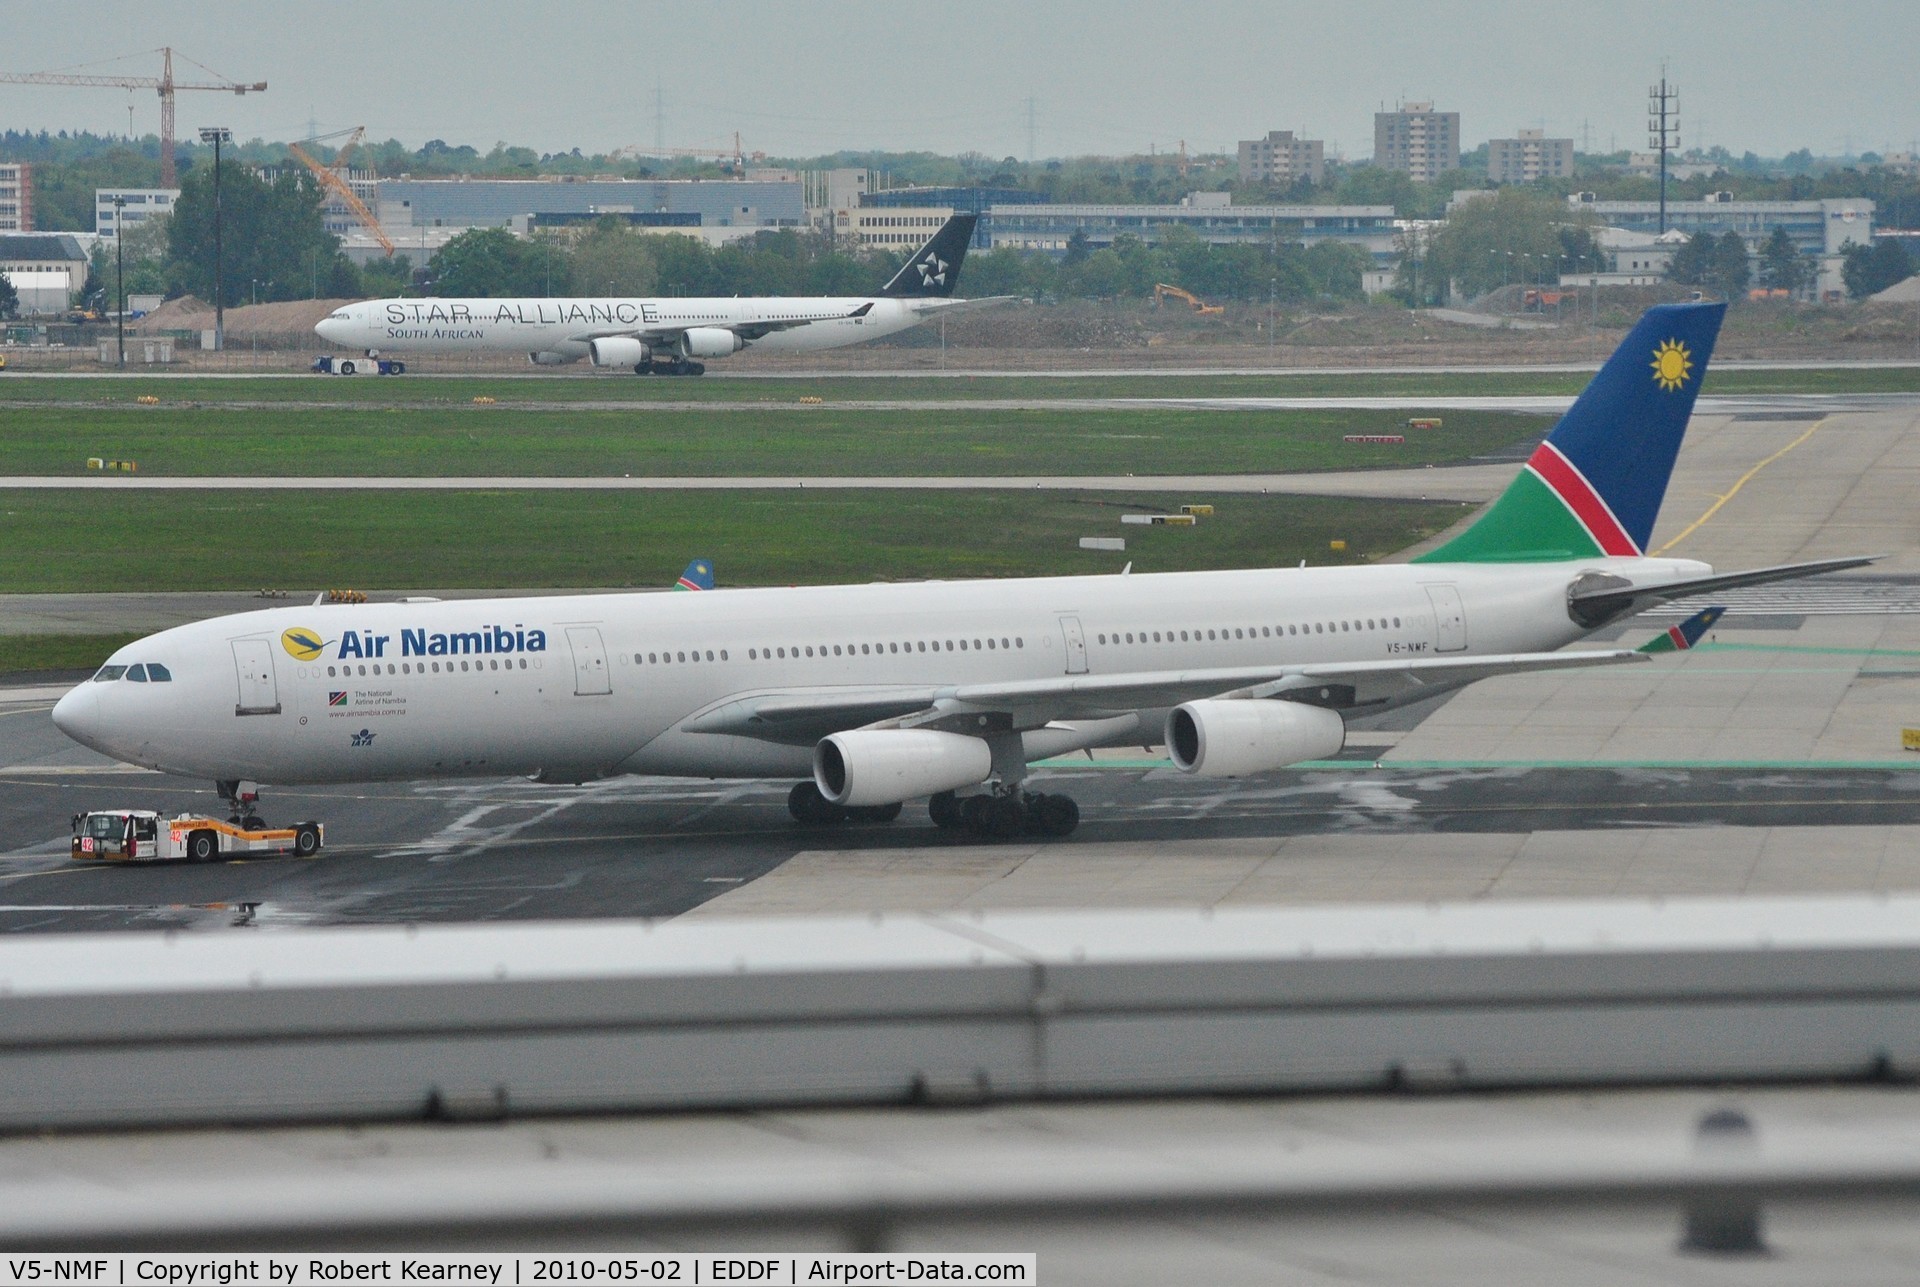 V5-NMF, 1994 Airbus A340-311 C/N 047, Air Namibia on tow